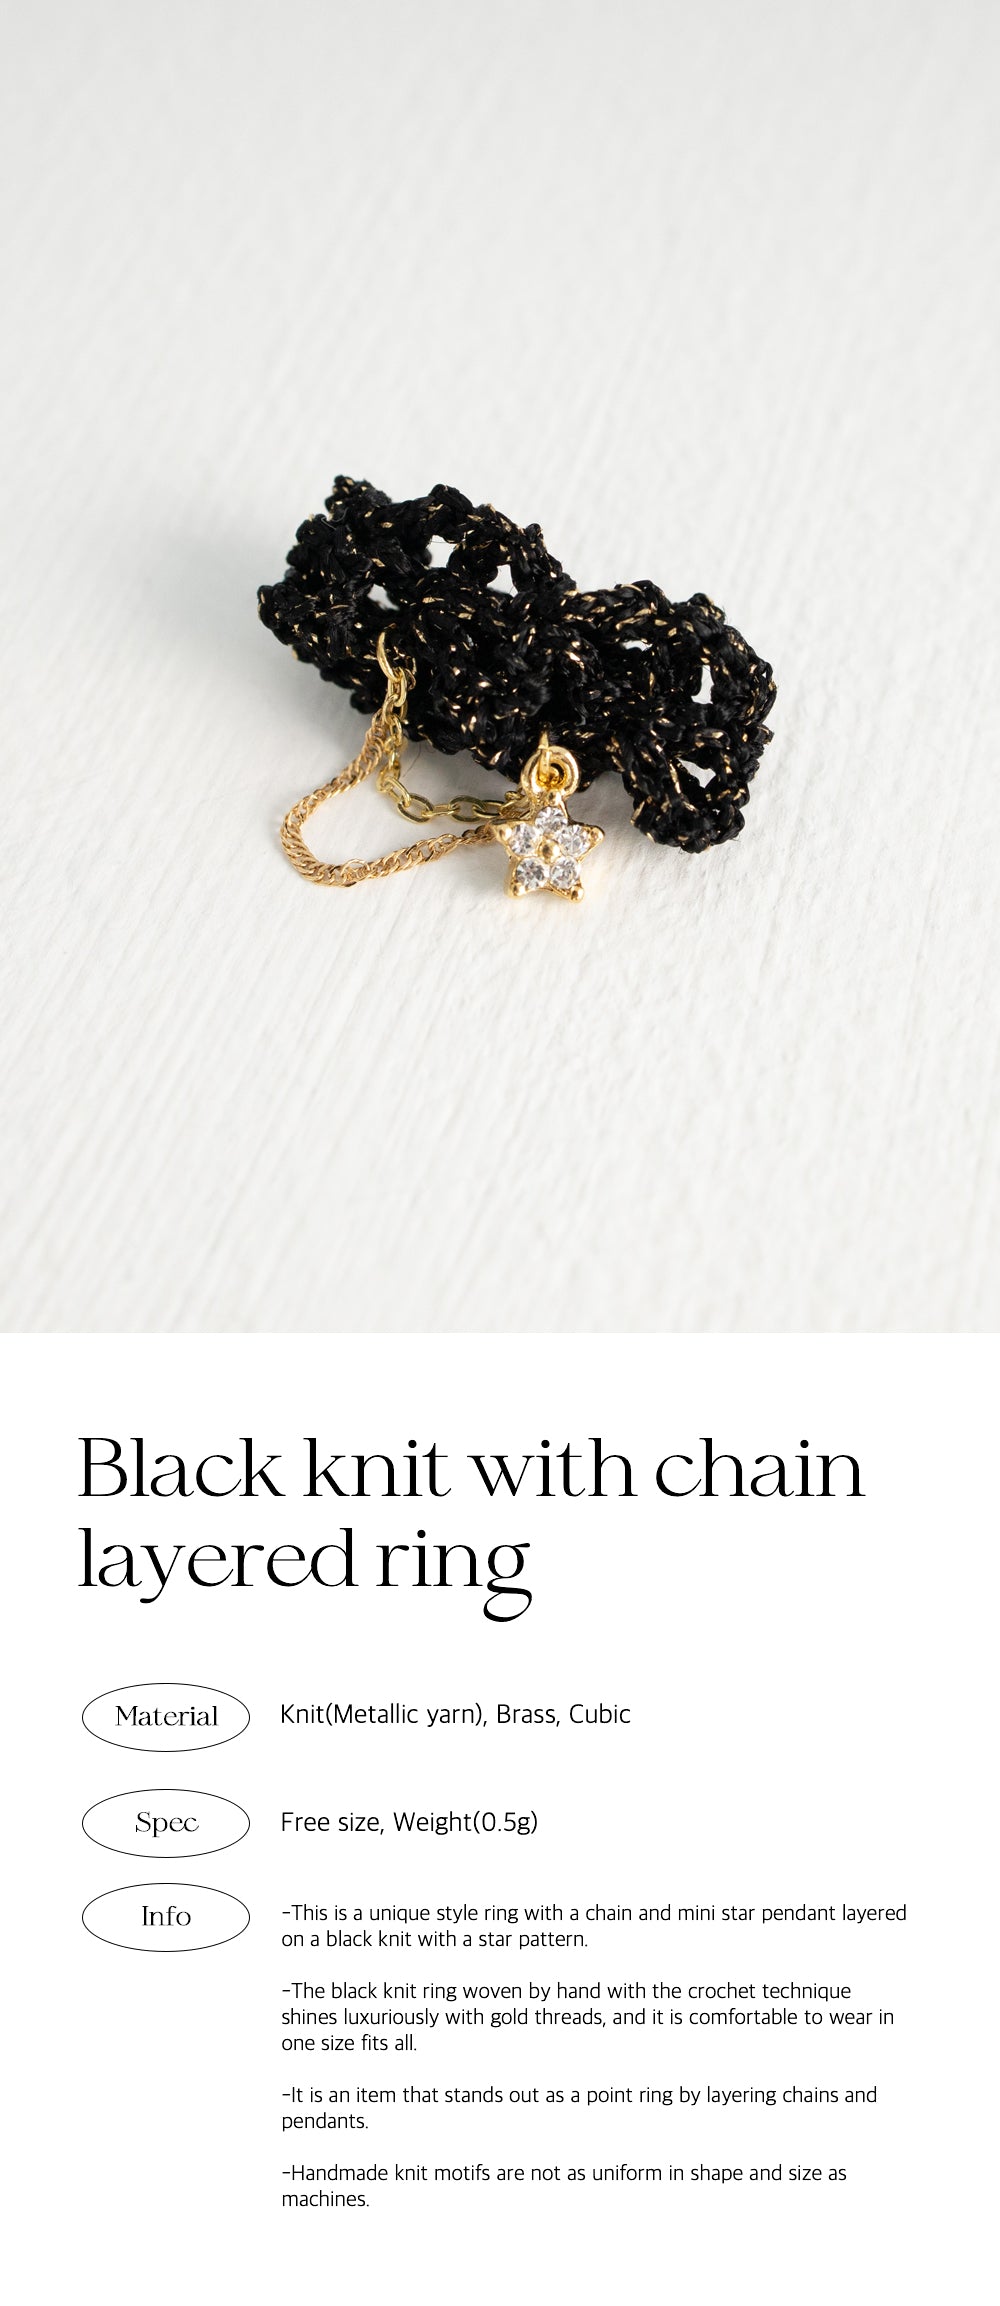 Black knit with chain layered ring